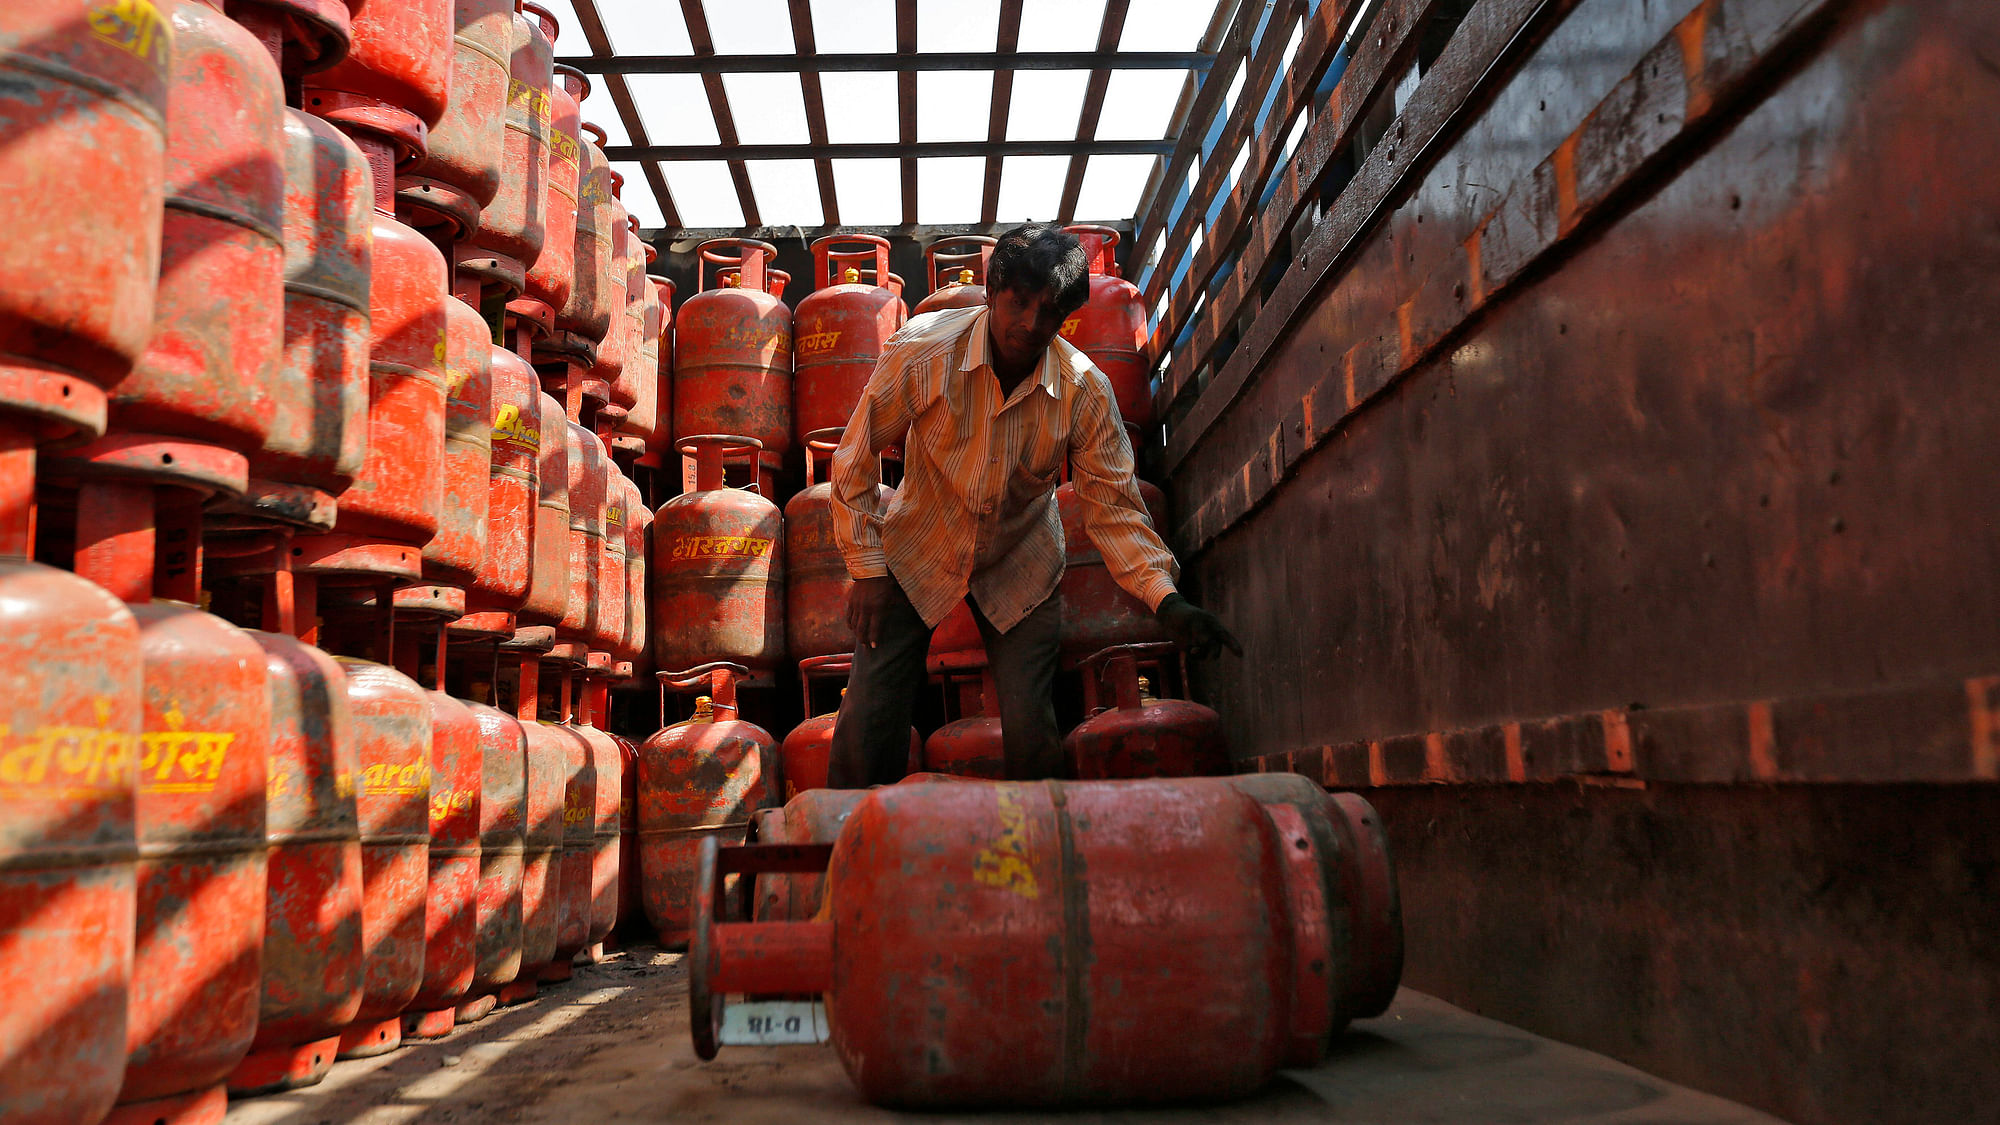  A worker unloads liquefied petroleum gas (LPG) cooking cylinders from a supply truck outside a distribution centre. Image used for representational purposes.